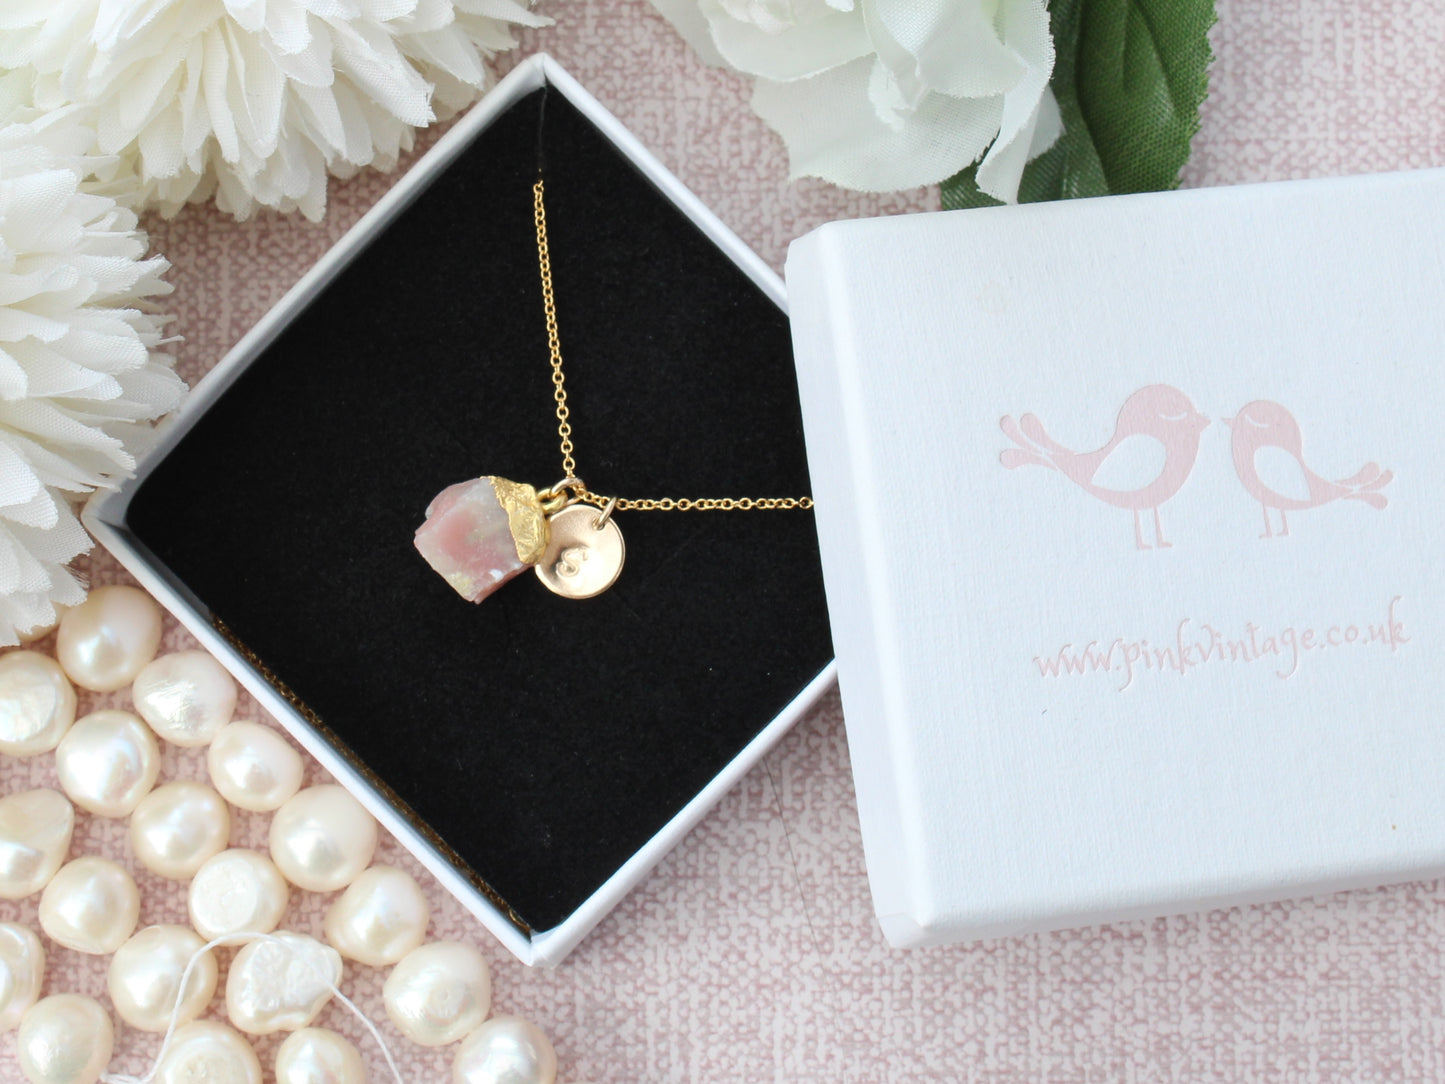 Personalised pink opal necklace in gold.